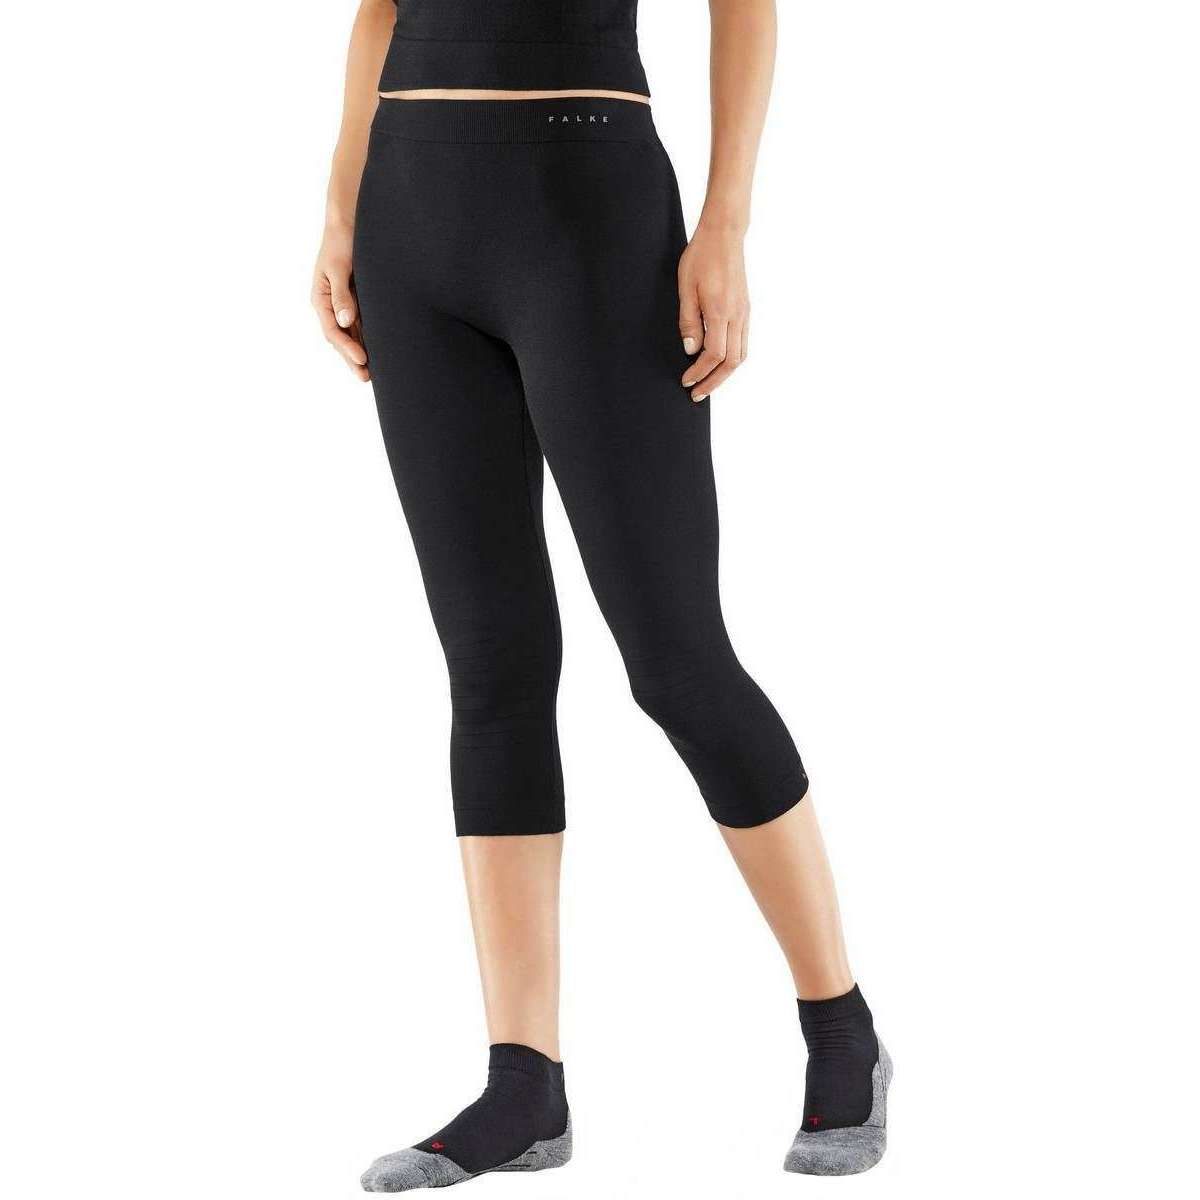 WoolTech Tights in Black